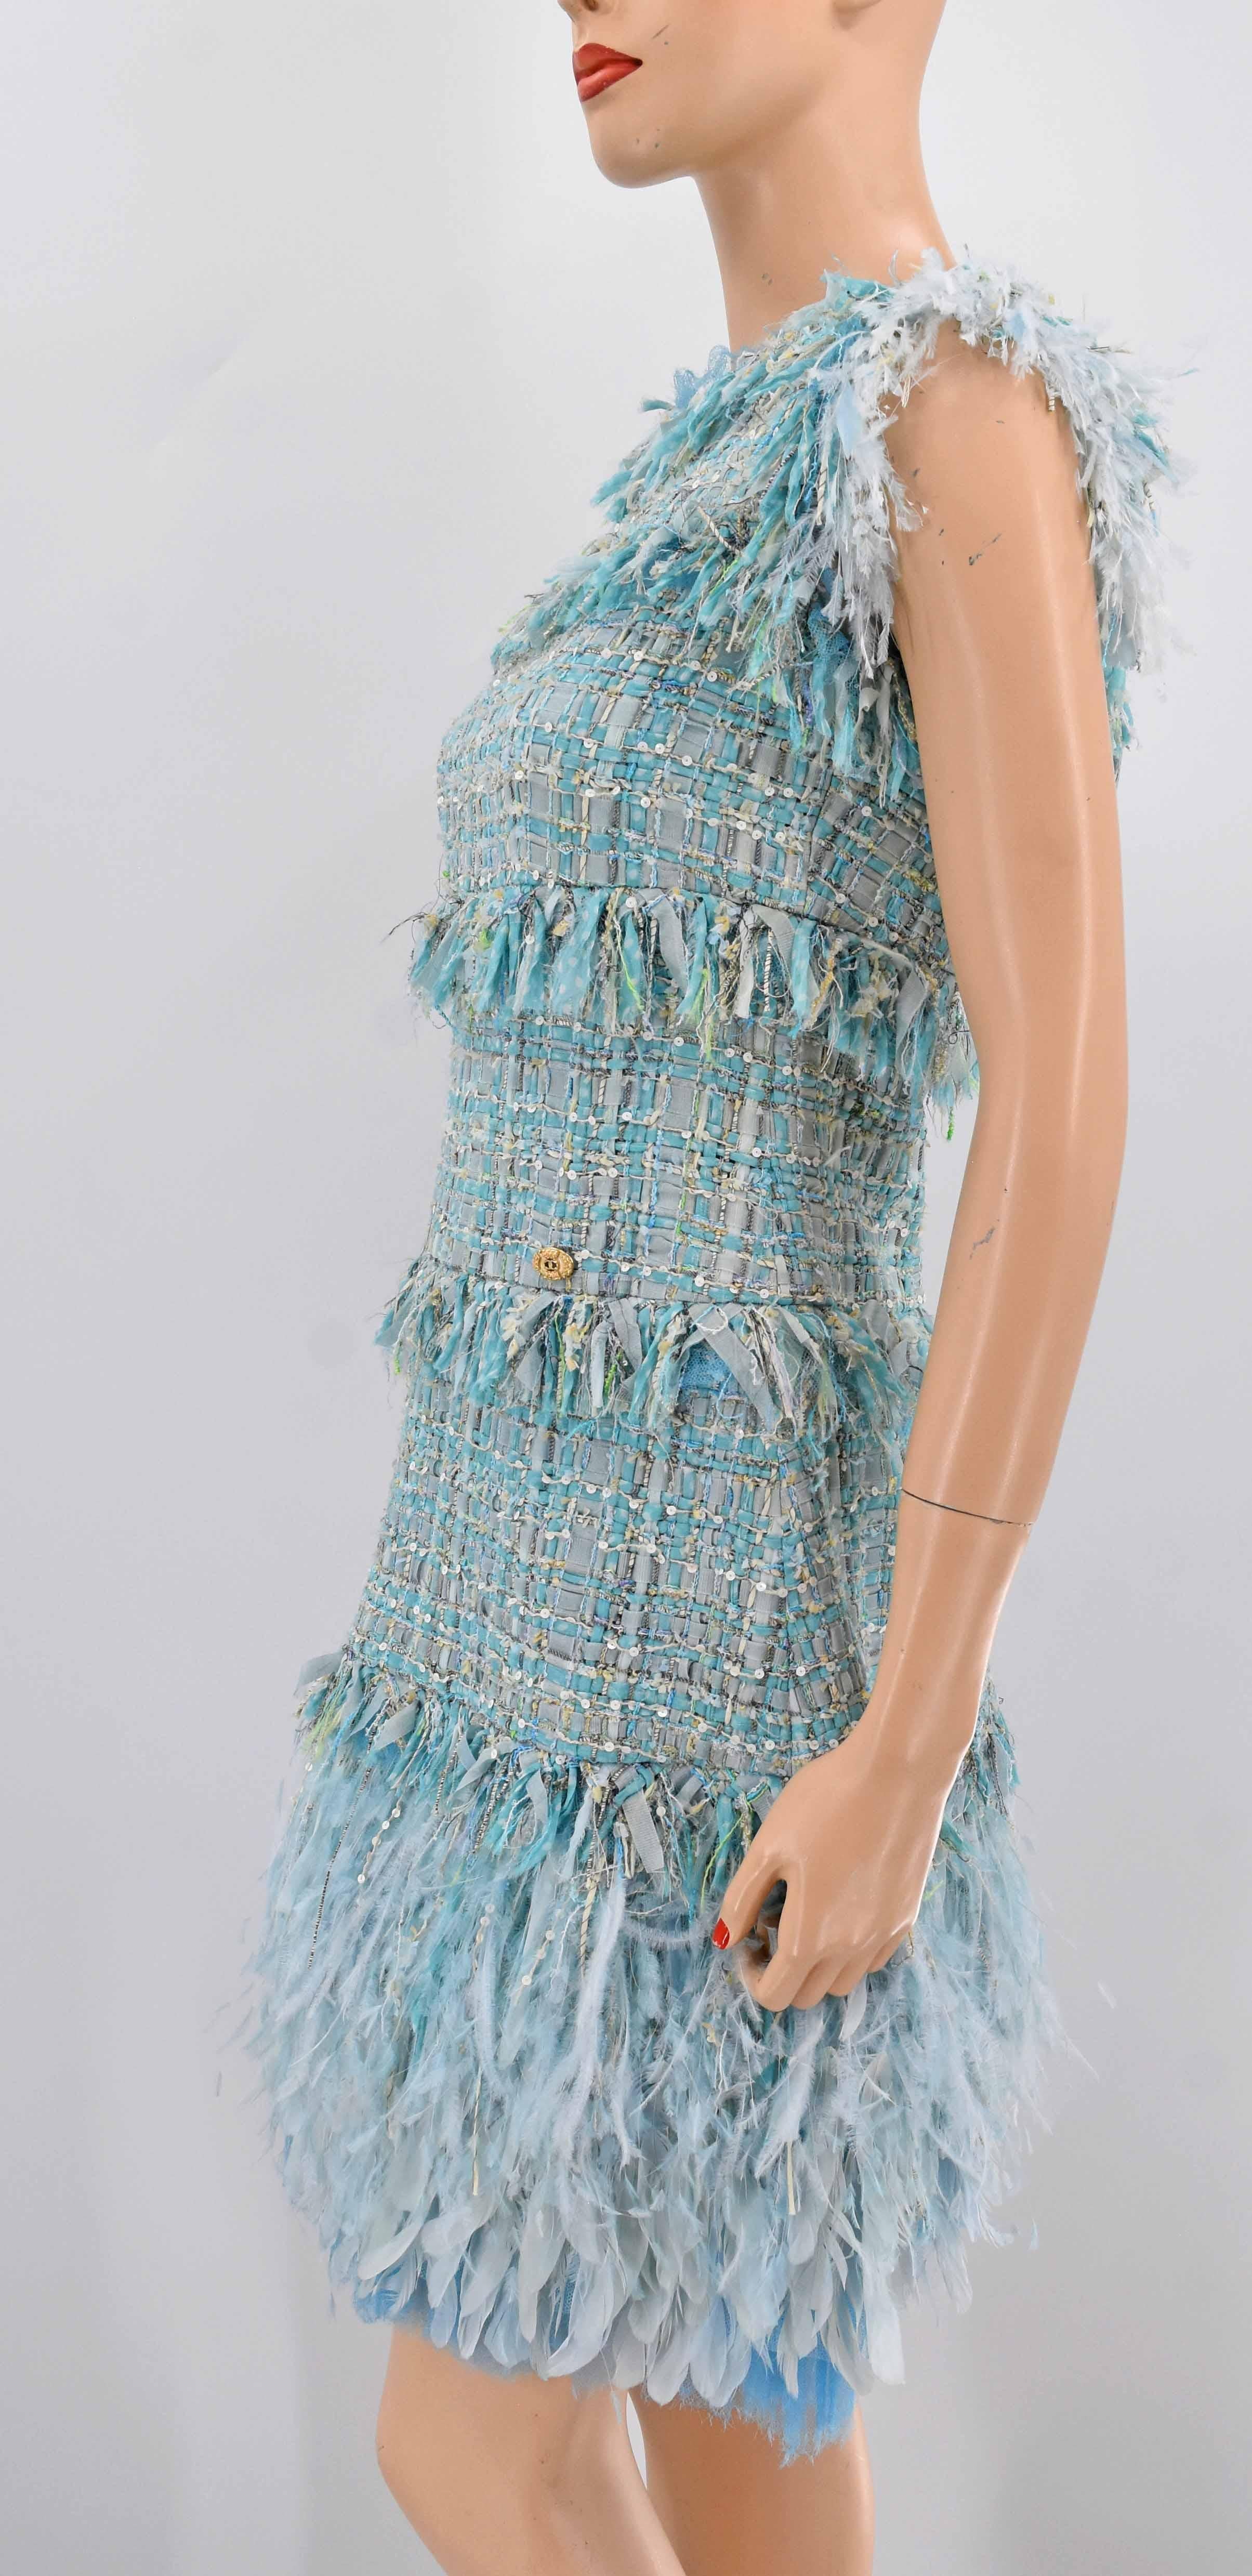 Chanel Tweed Jeweled Runway Fringe Dress With Belt NWT $14, 310 11P Spring 2011  In New Condition For Sale In Merced, CA